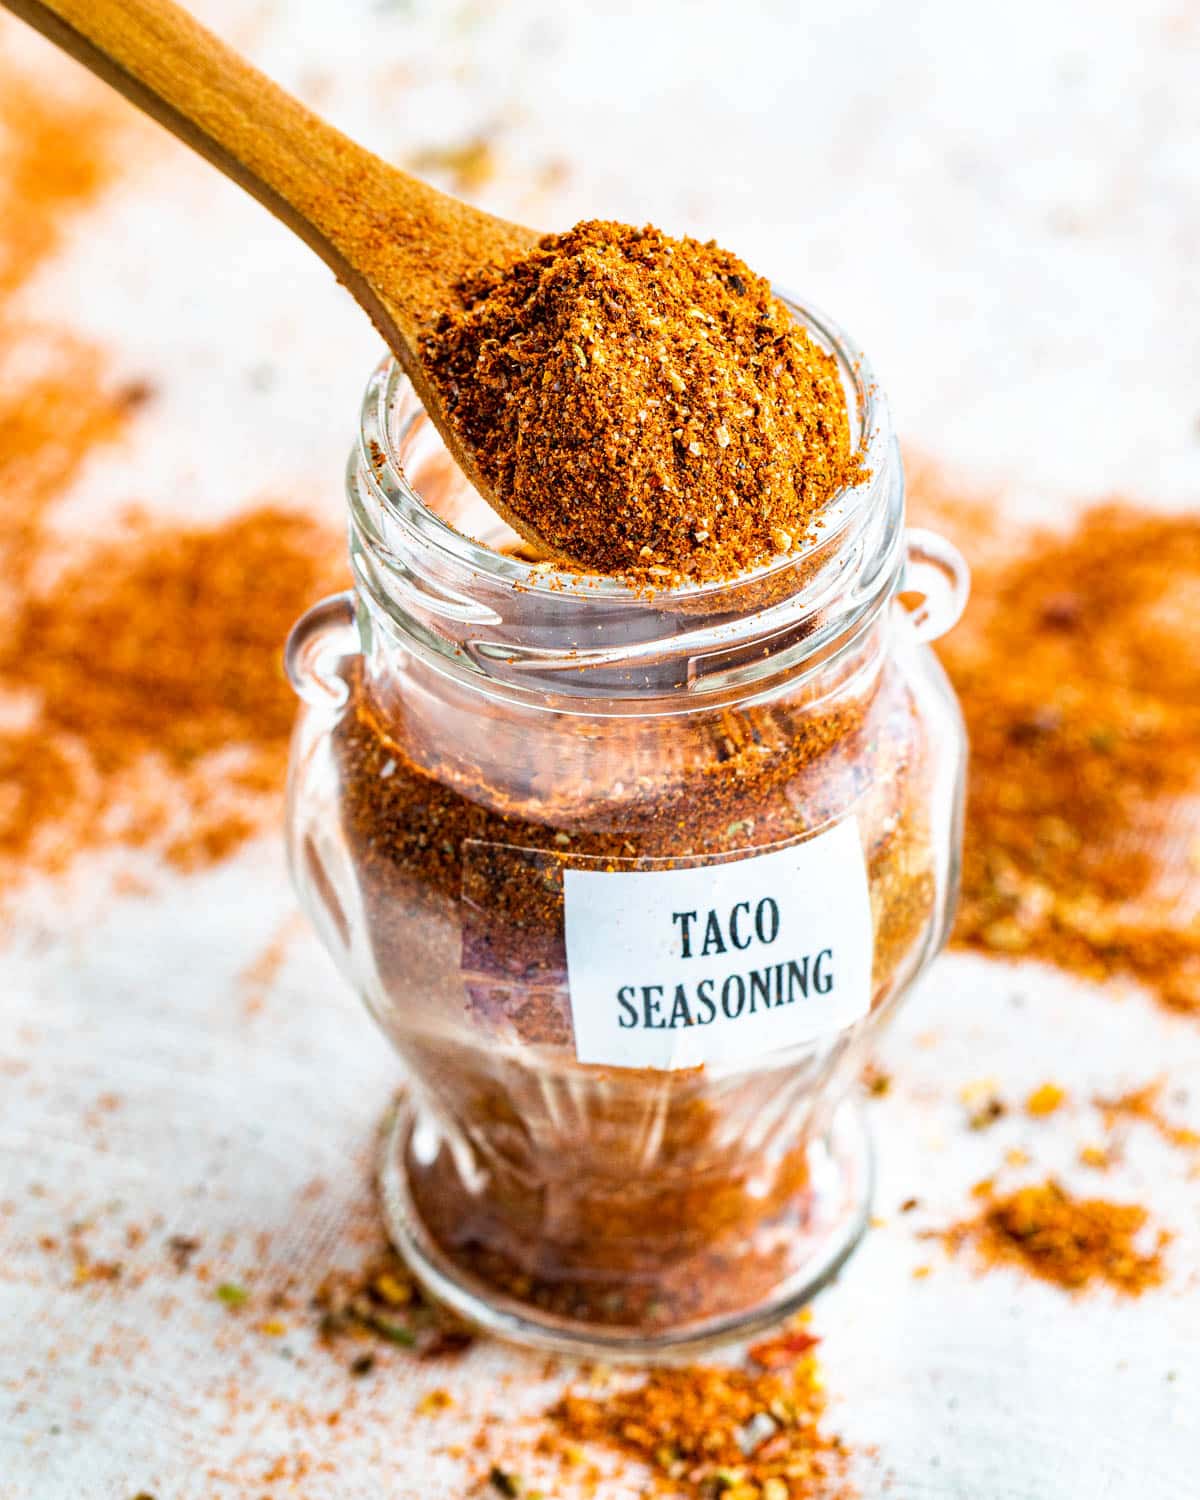 a small spice jar filled with taco seasoning and a mini wooden spoon spooning some out